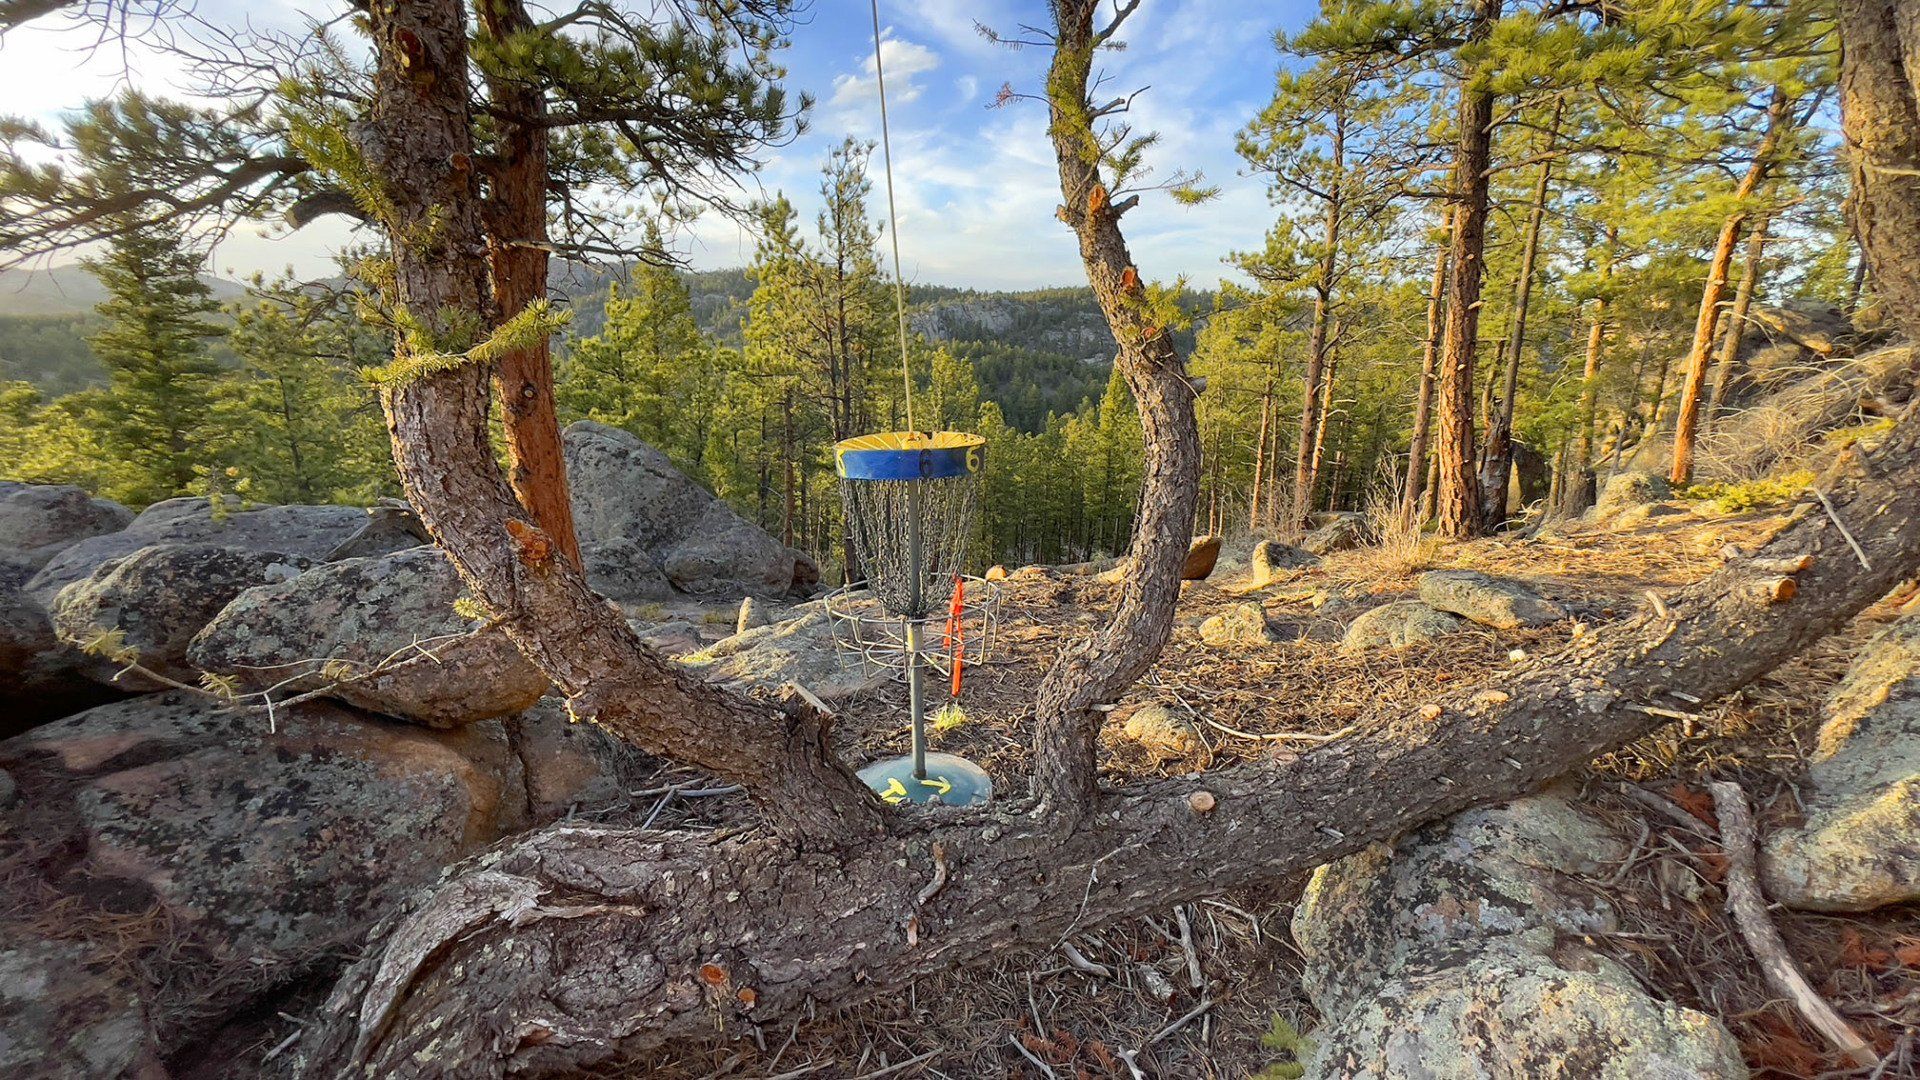 New disc golf hole 13 basket view at Sundance Trail Guest Ranch May 2022